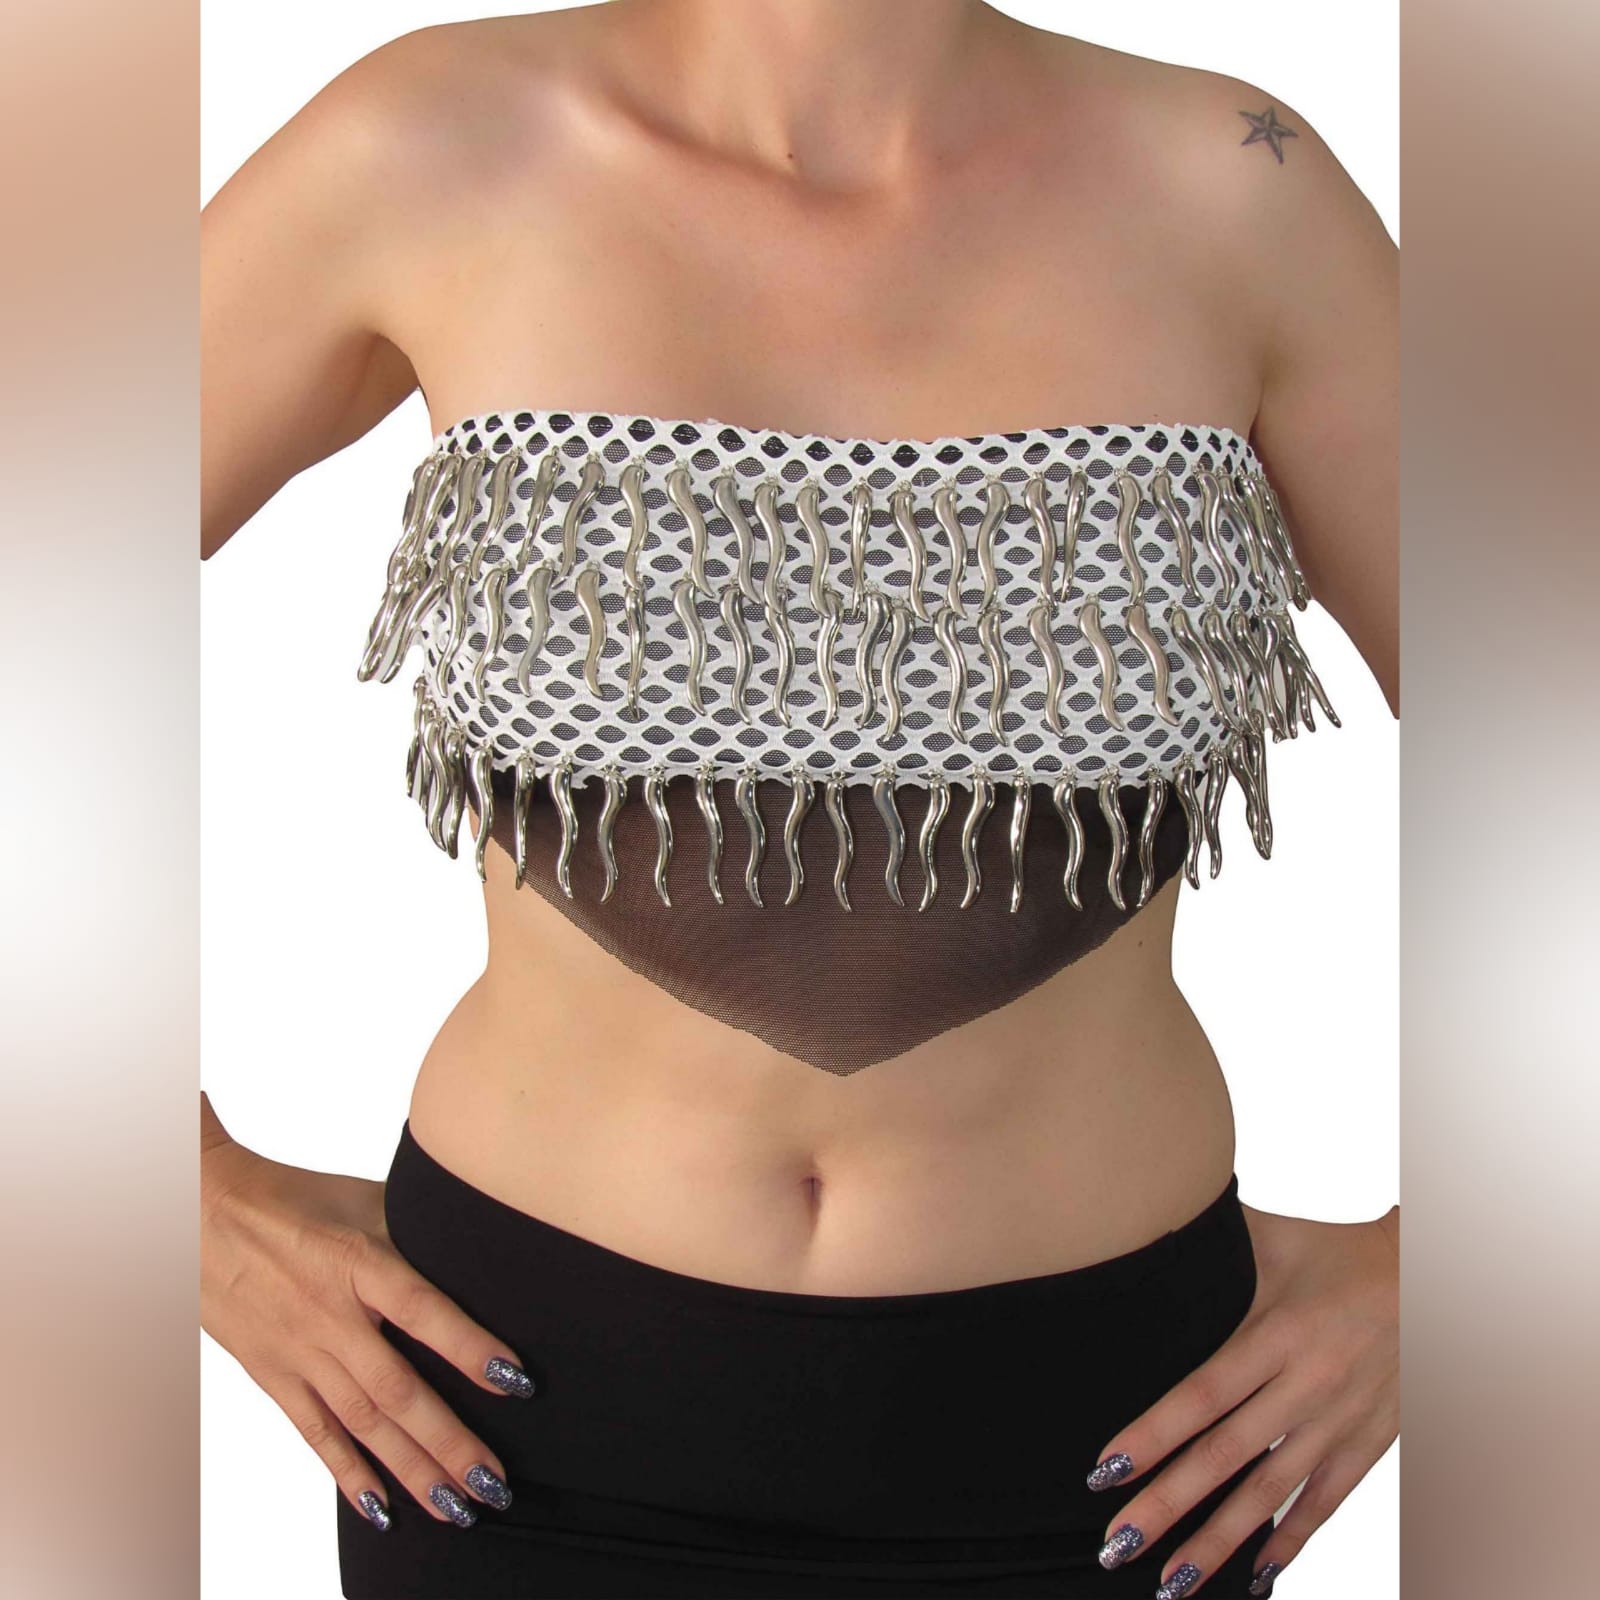 Black white silver boob tube crop top 3 black white and silver boobtube tie up strap crop top, with unique finishes. Handmade, one of a kind short top, great for the young woman that wants to look unique and feel sexy. This short sexy top fits a small, medium or large as you can just tie it tighter or looser. Its a great smart casual top, for a night out of dancing and fun.